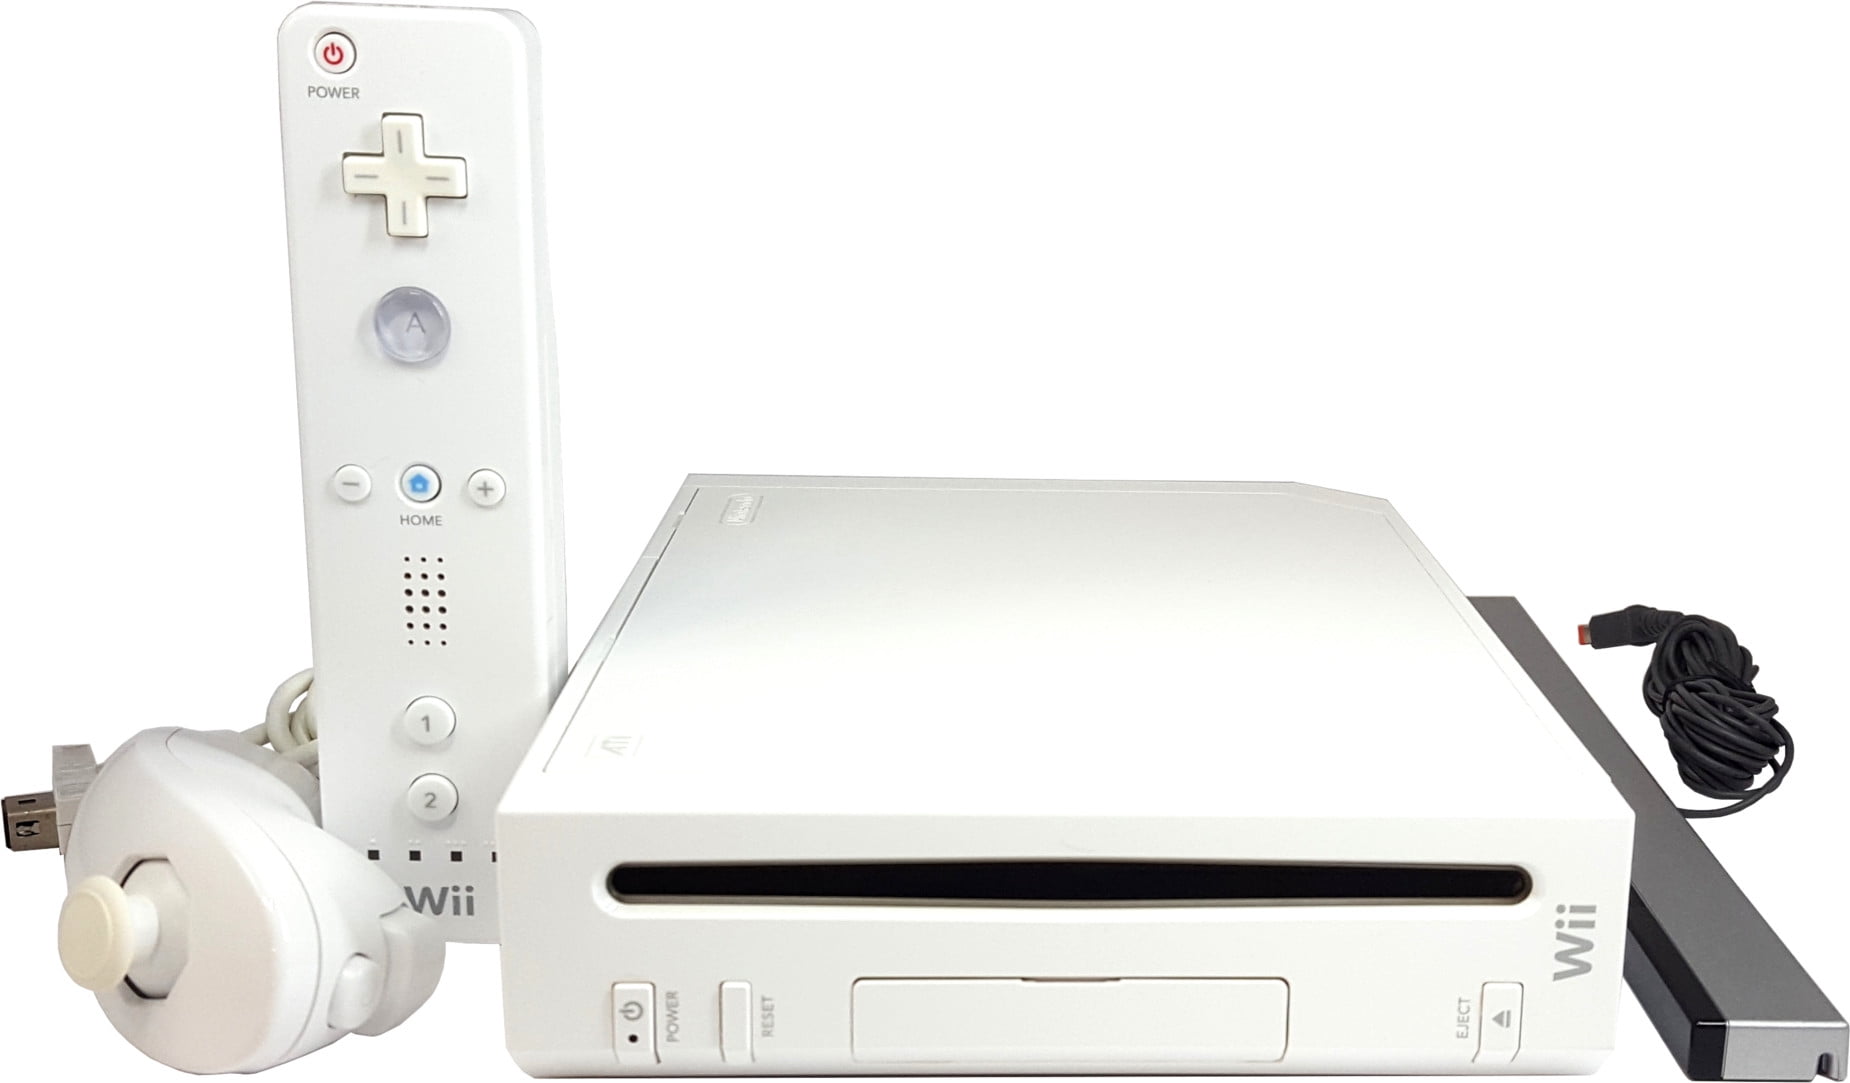 Restored Nintendo Wii Video Game Console (White) Matching Remote and  Nunchuk Controllers (Refurbished)